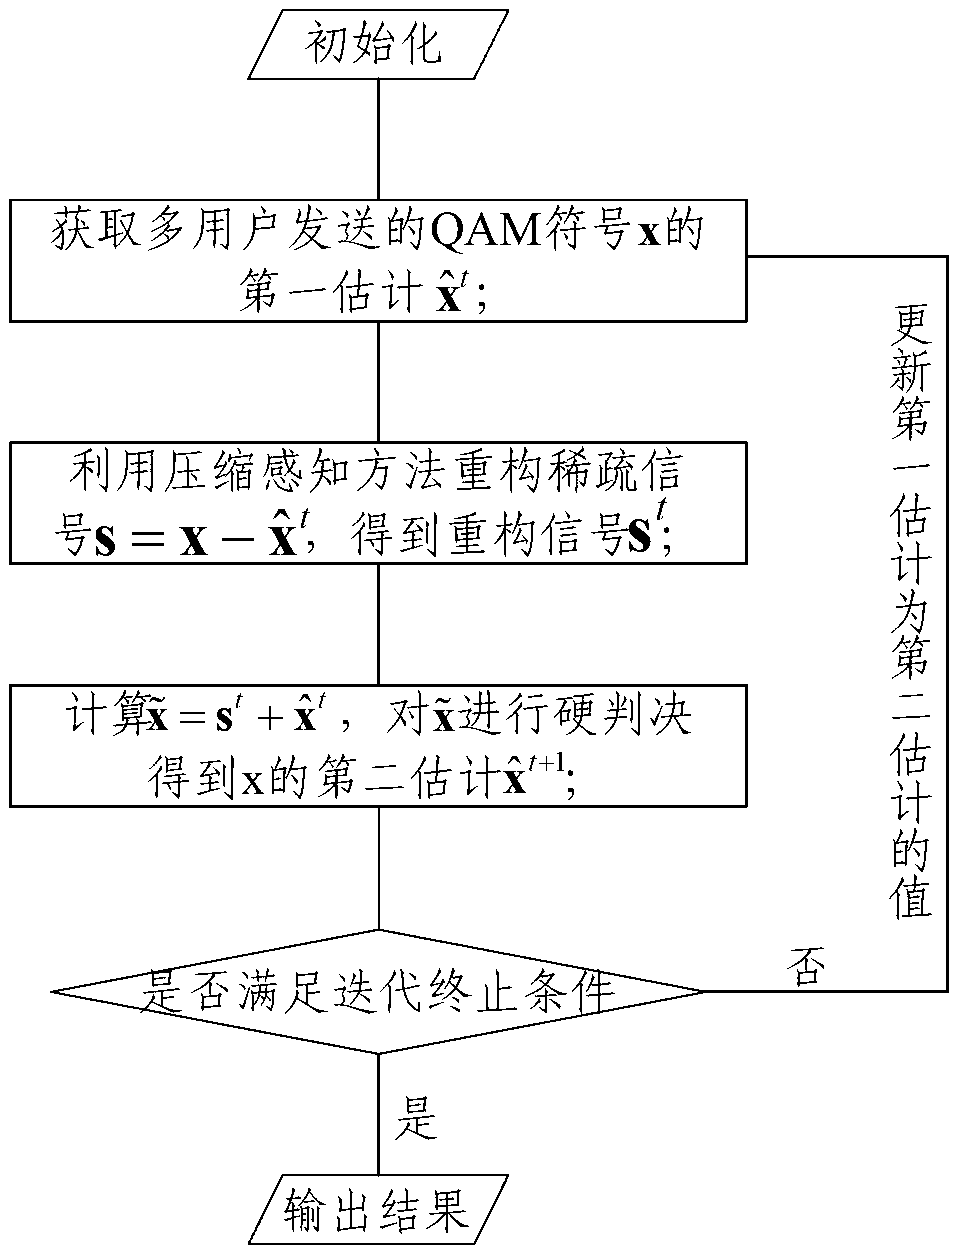 Multiple input multiple output (MIMO) uplink multi-user signal detection method, detection device and receiving system